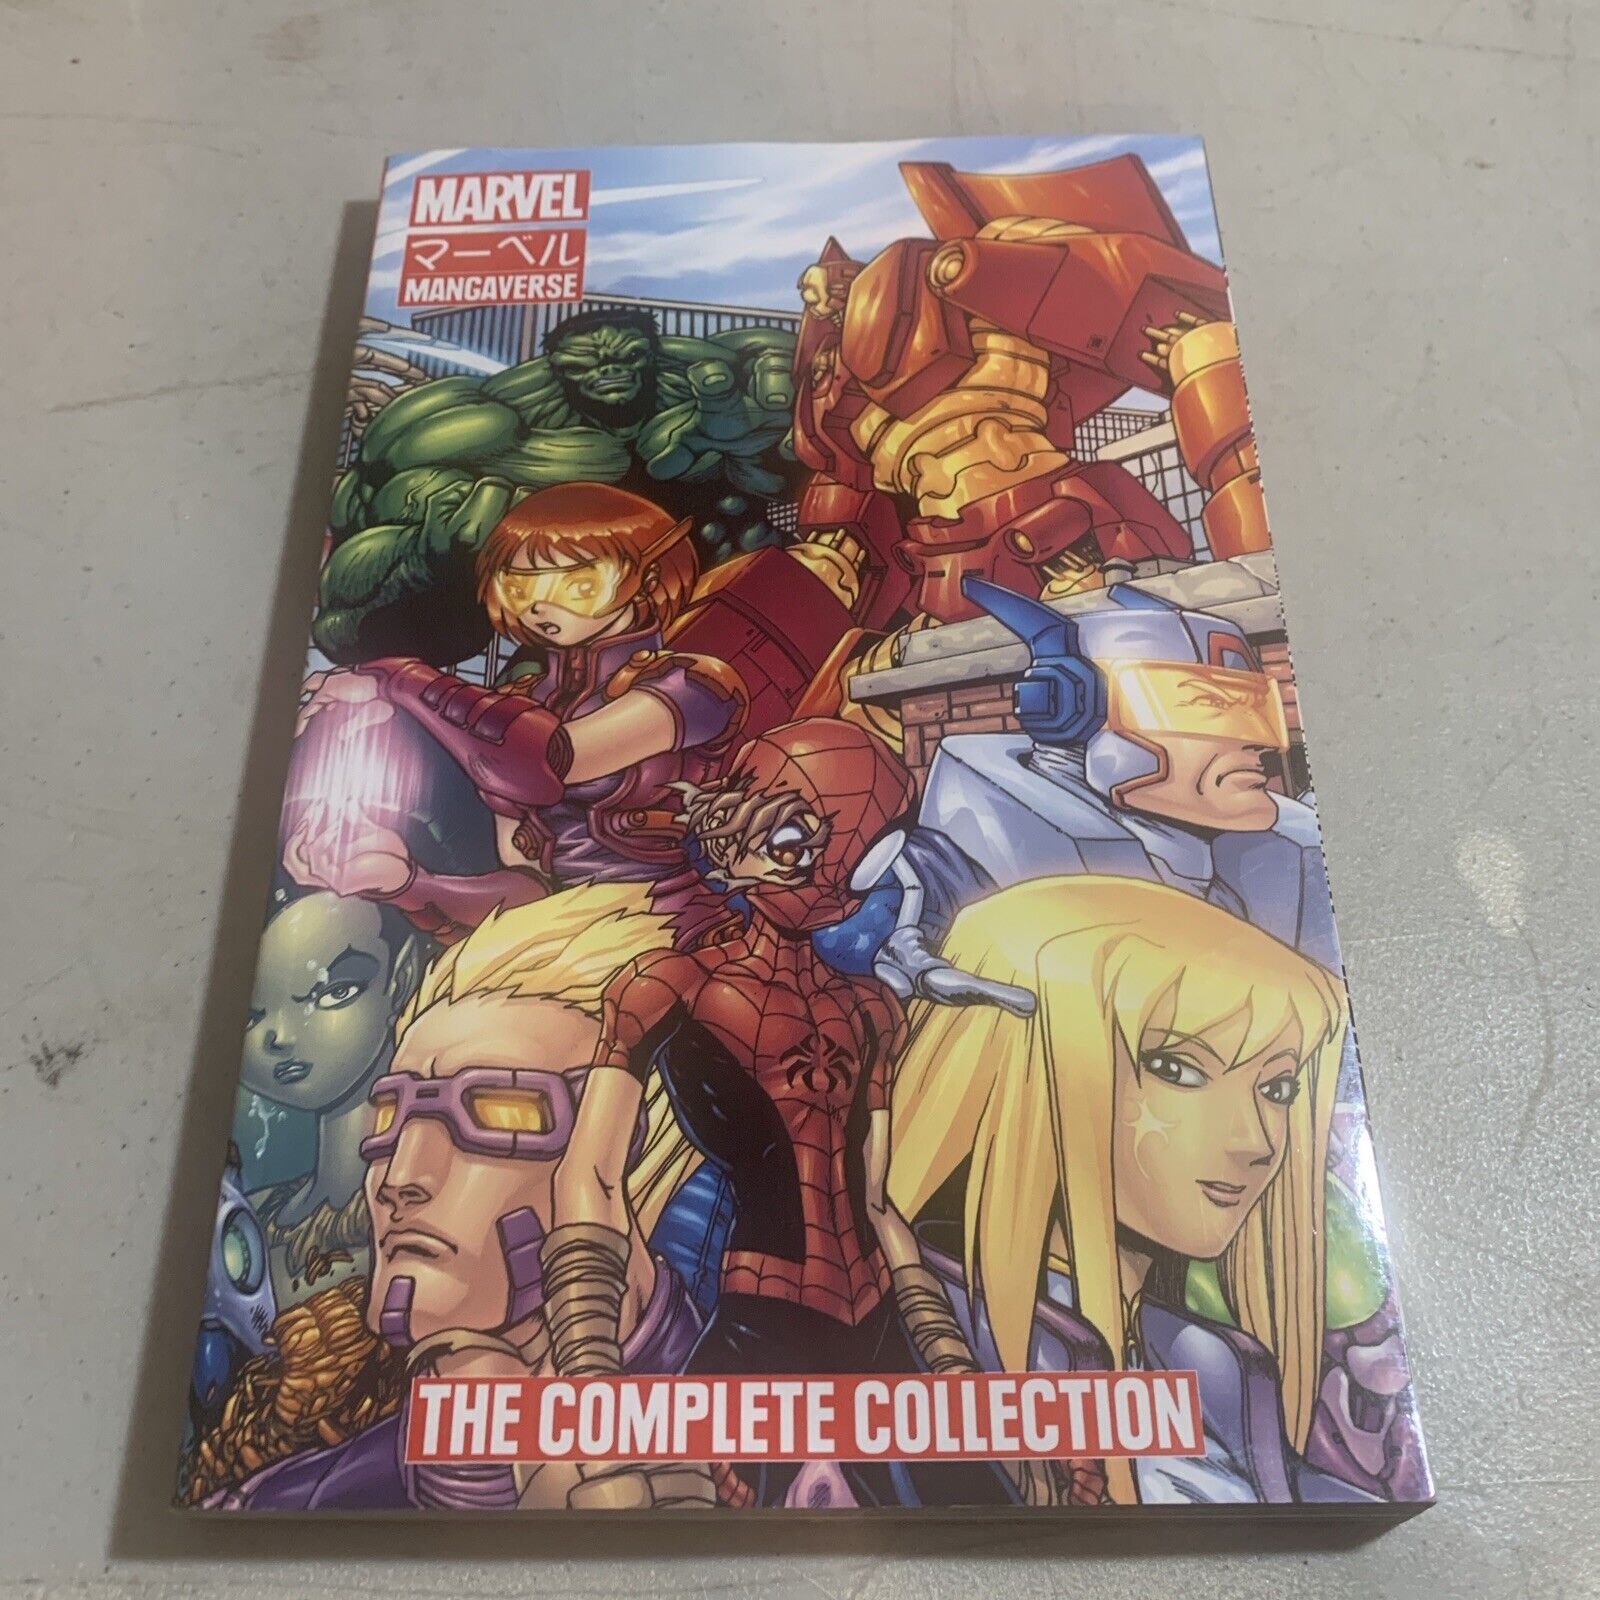 Mangaverse The Complete Collection Marvel Graphic Novel Comic Book